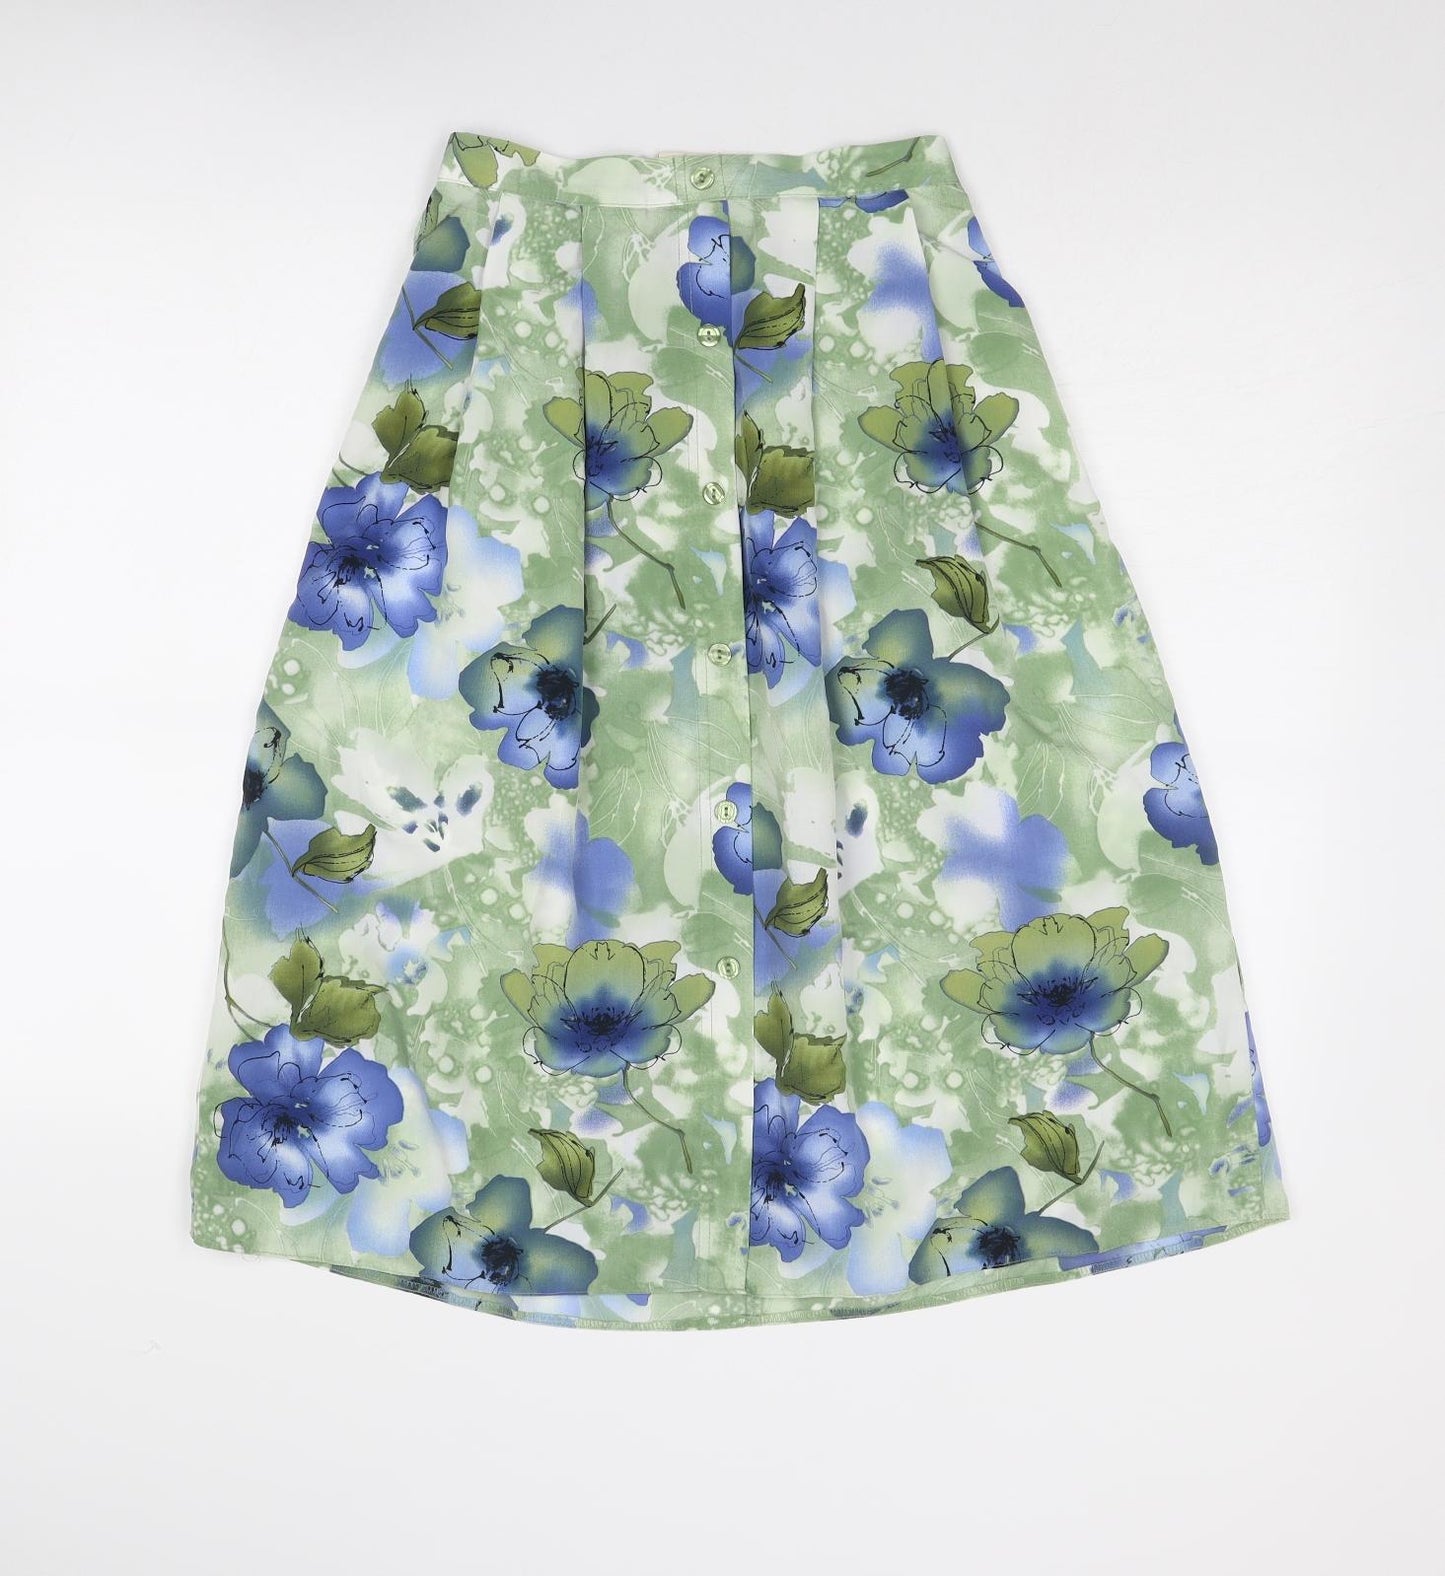 EWM Womens Green Floral Polyester Pleated Skirt Size 10